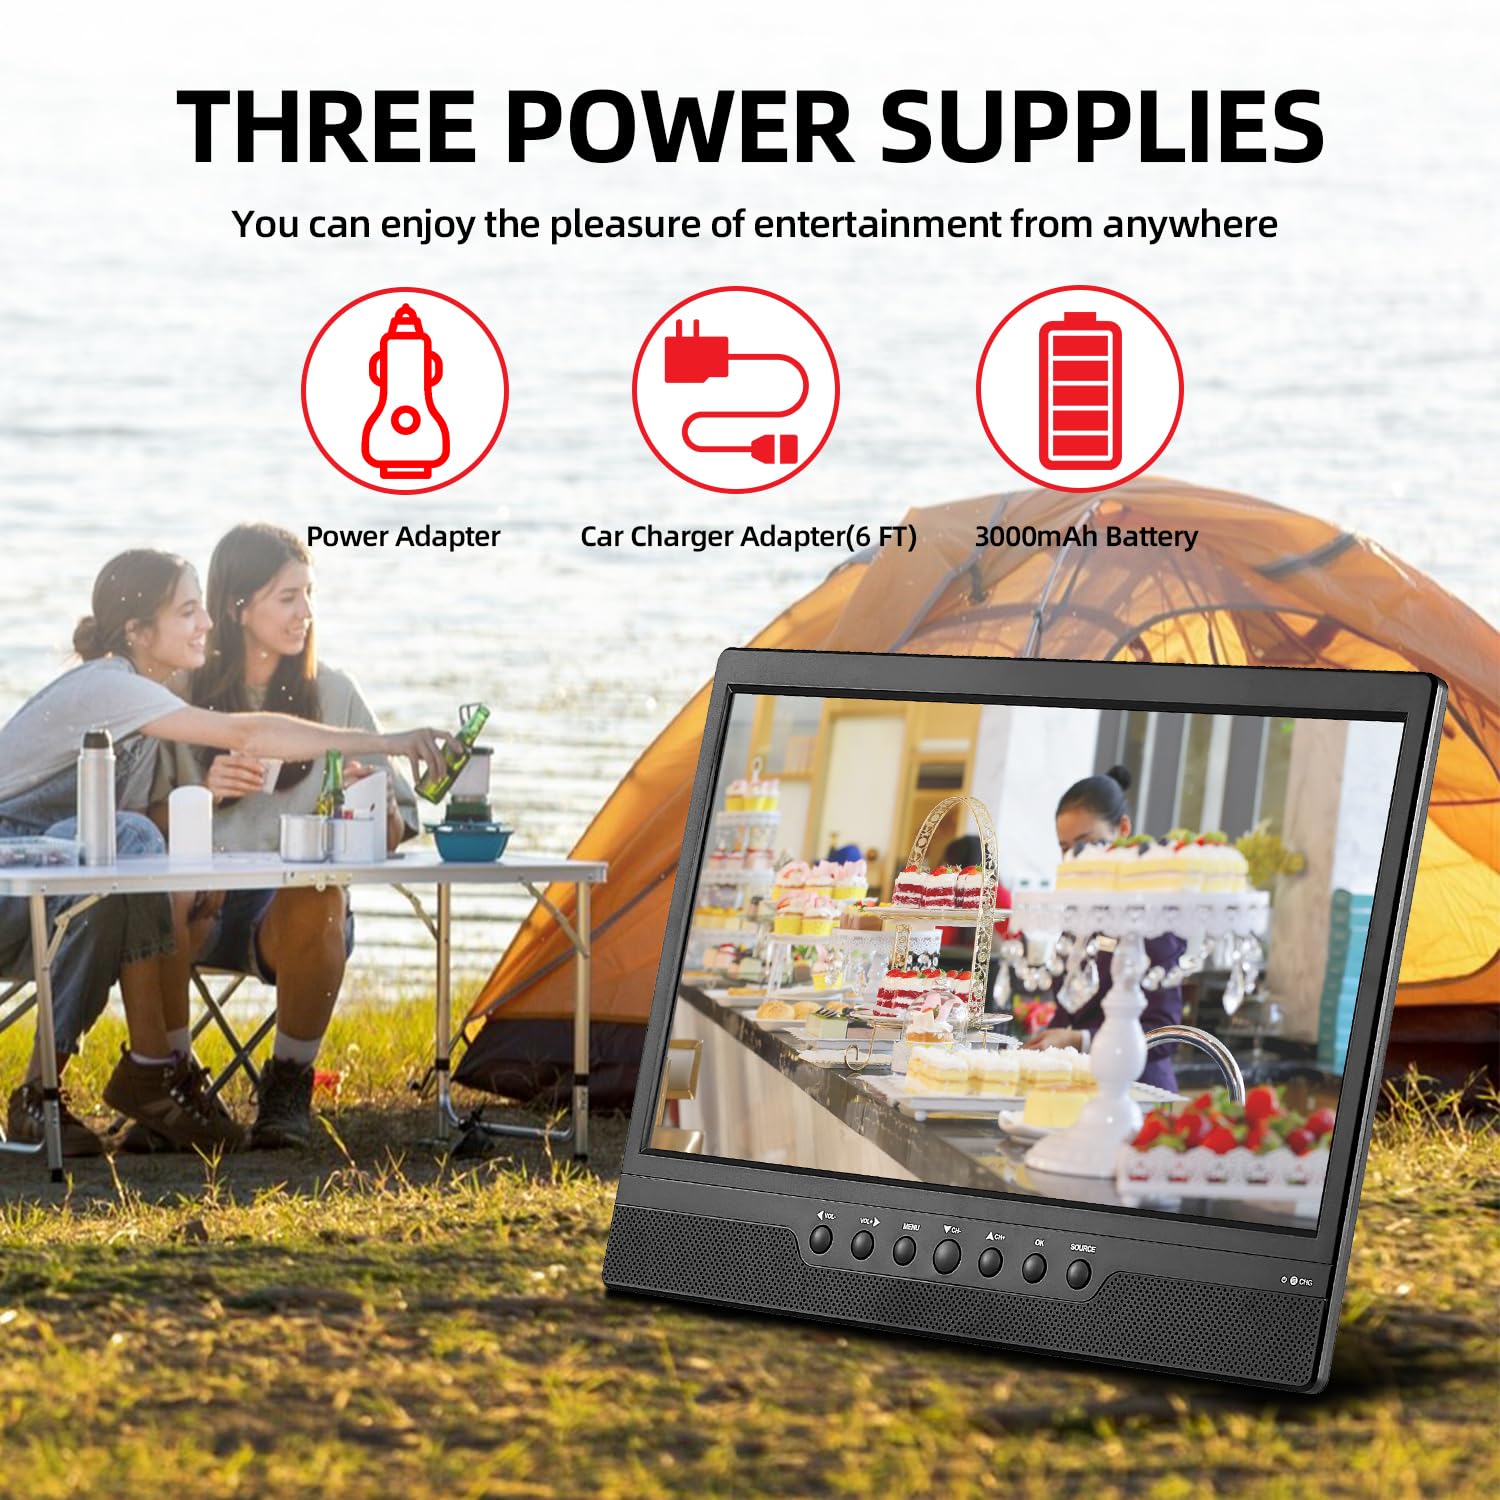 othoig 14inch Portable TV,Small tv with Antenna,HDMI,USB,AV Slot and Digital ATSC Tuner,Rechargeable Battery Operated,12 Volt car Cable/AC for Kitchen RV car Camping(US 2023)